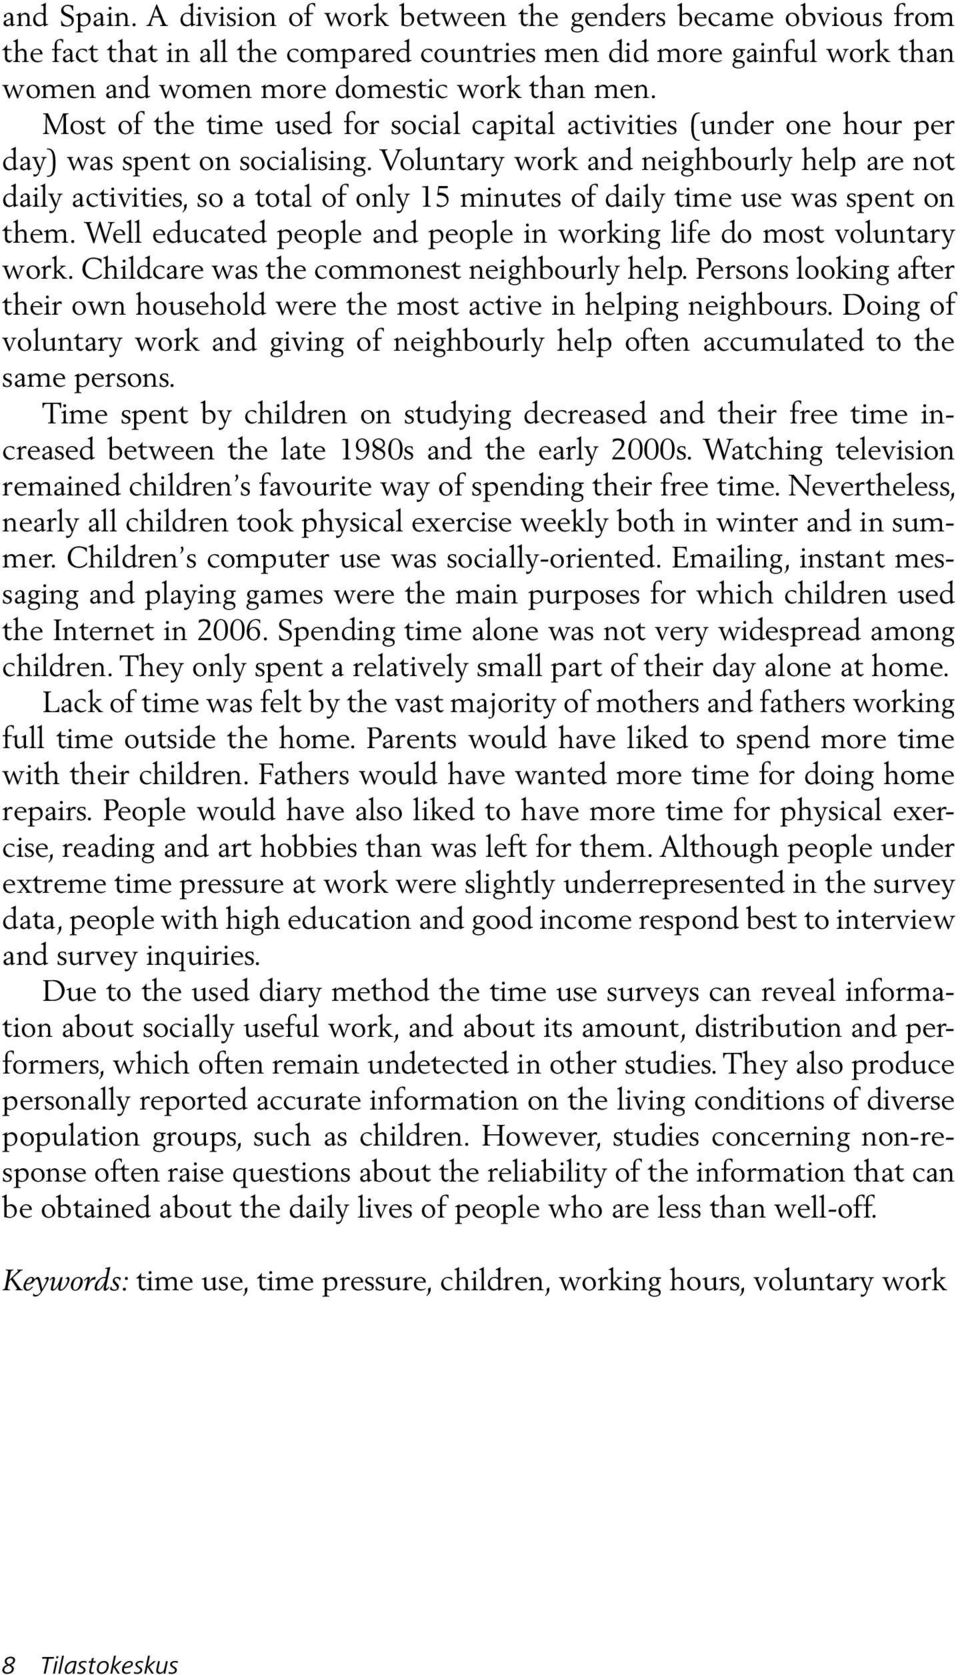 Voluntary work and neighbourly help are not daily activities, so a total of only 15 minutes of daily time use was spent on them. Well educated people and people in working life do most voluntary work.